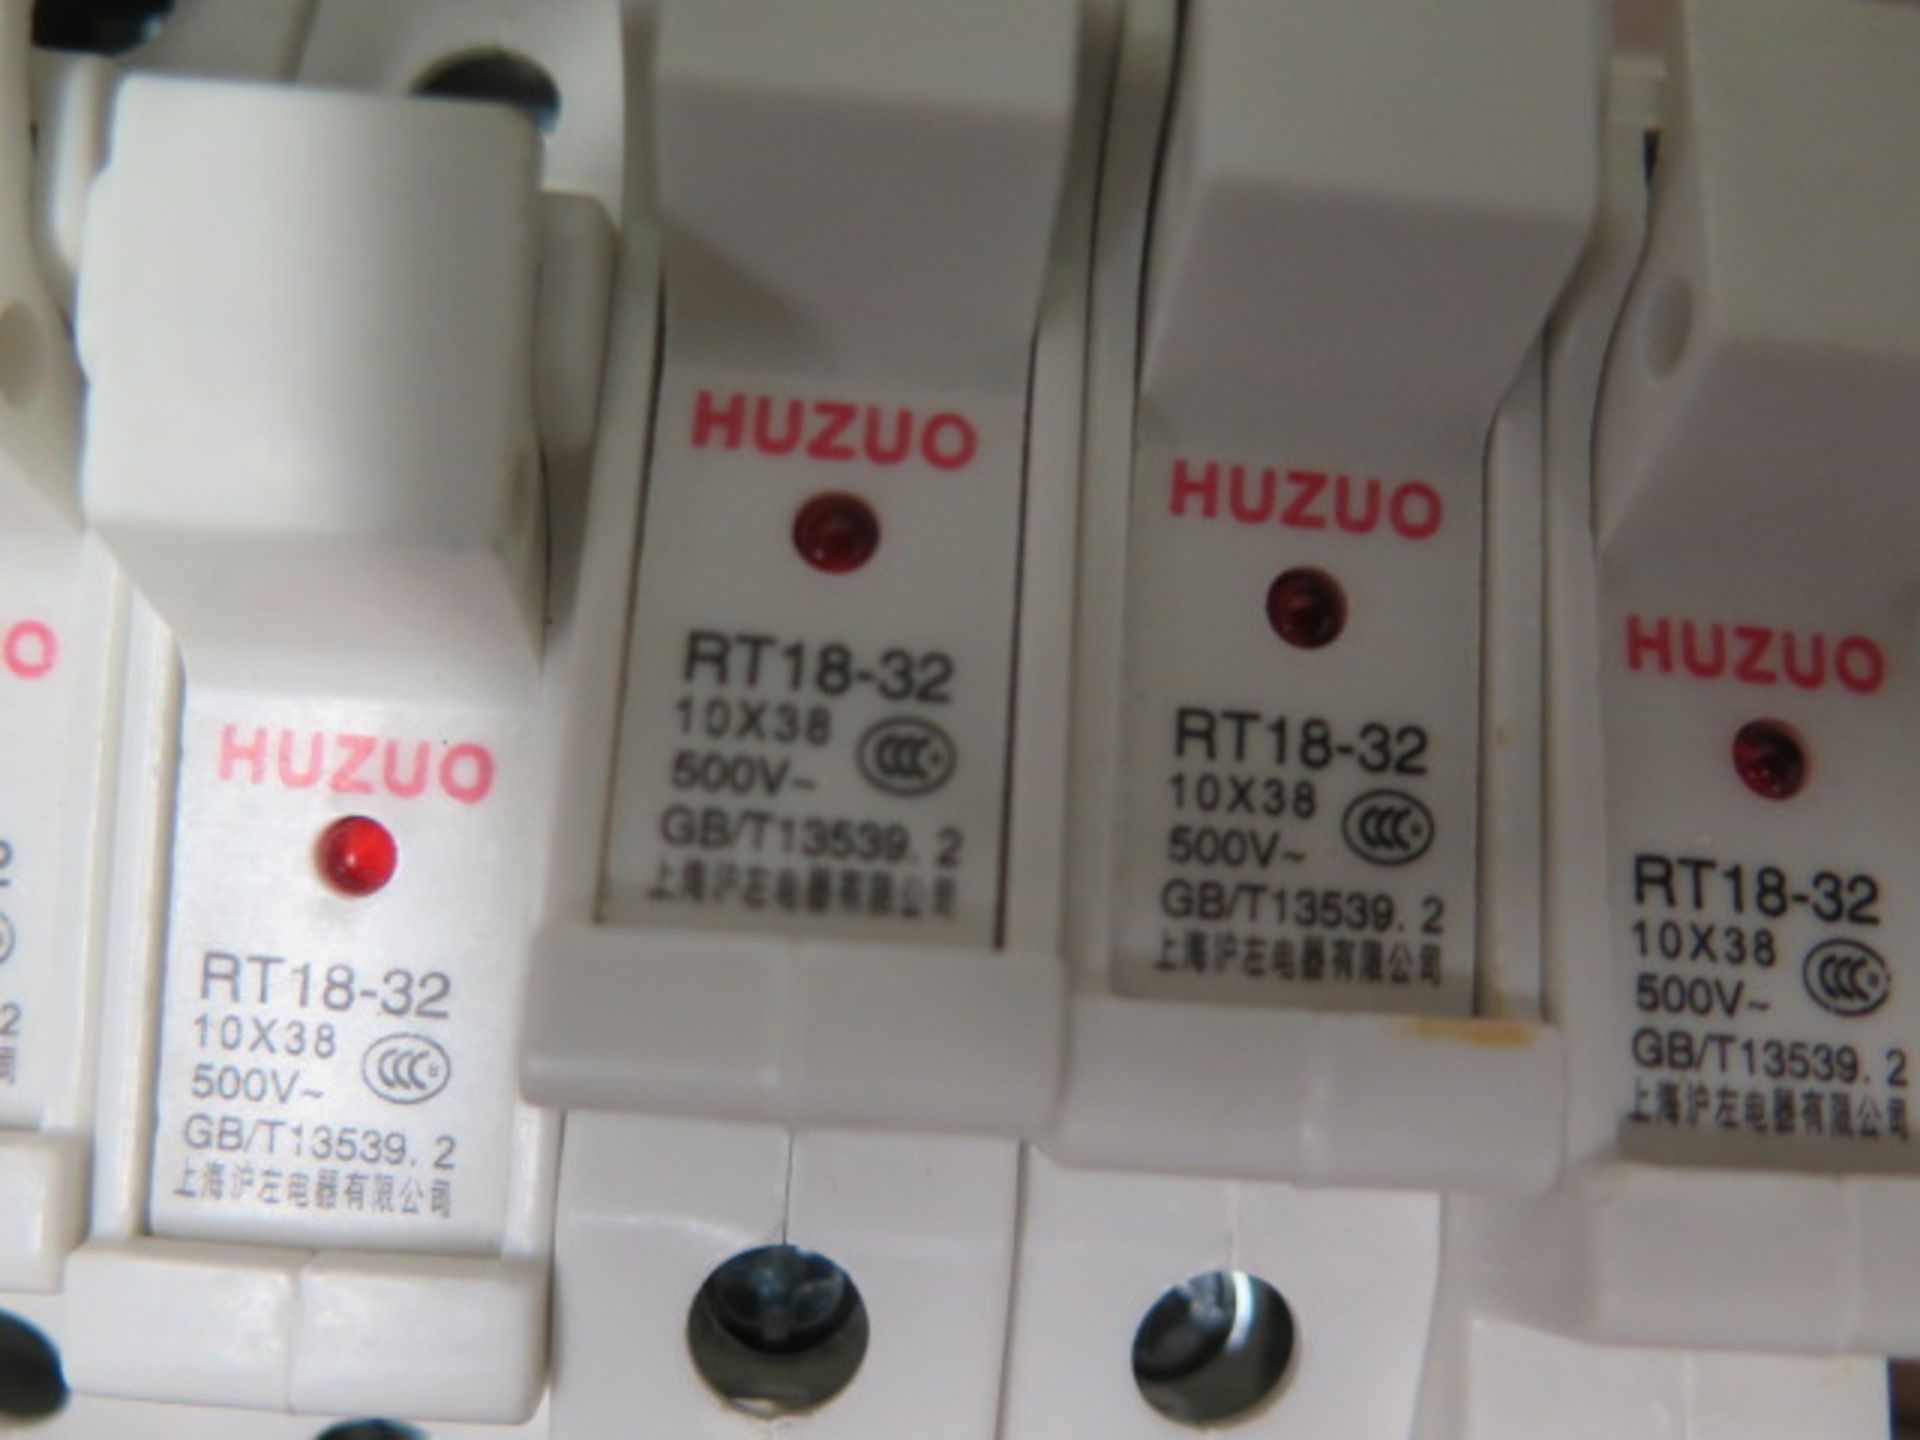 Schneider Easy8 C25 EA9AN2C25 Circuit Breakers (12) and Huzuo RT18-32 10X38 500V G3/T13539.2 Fuse Bl - Image 6 of 6